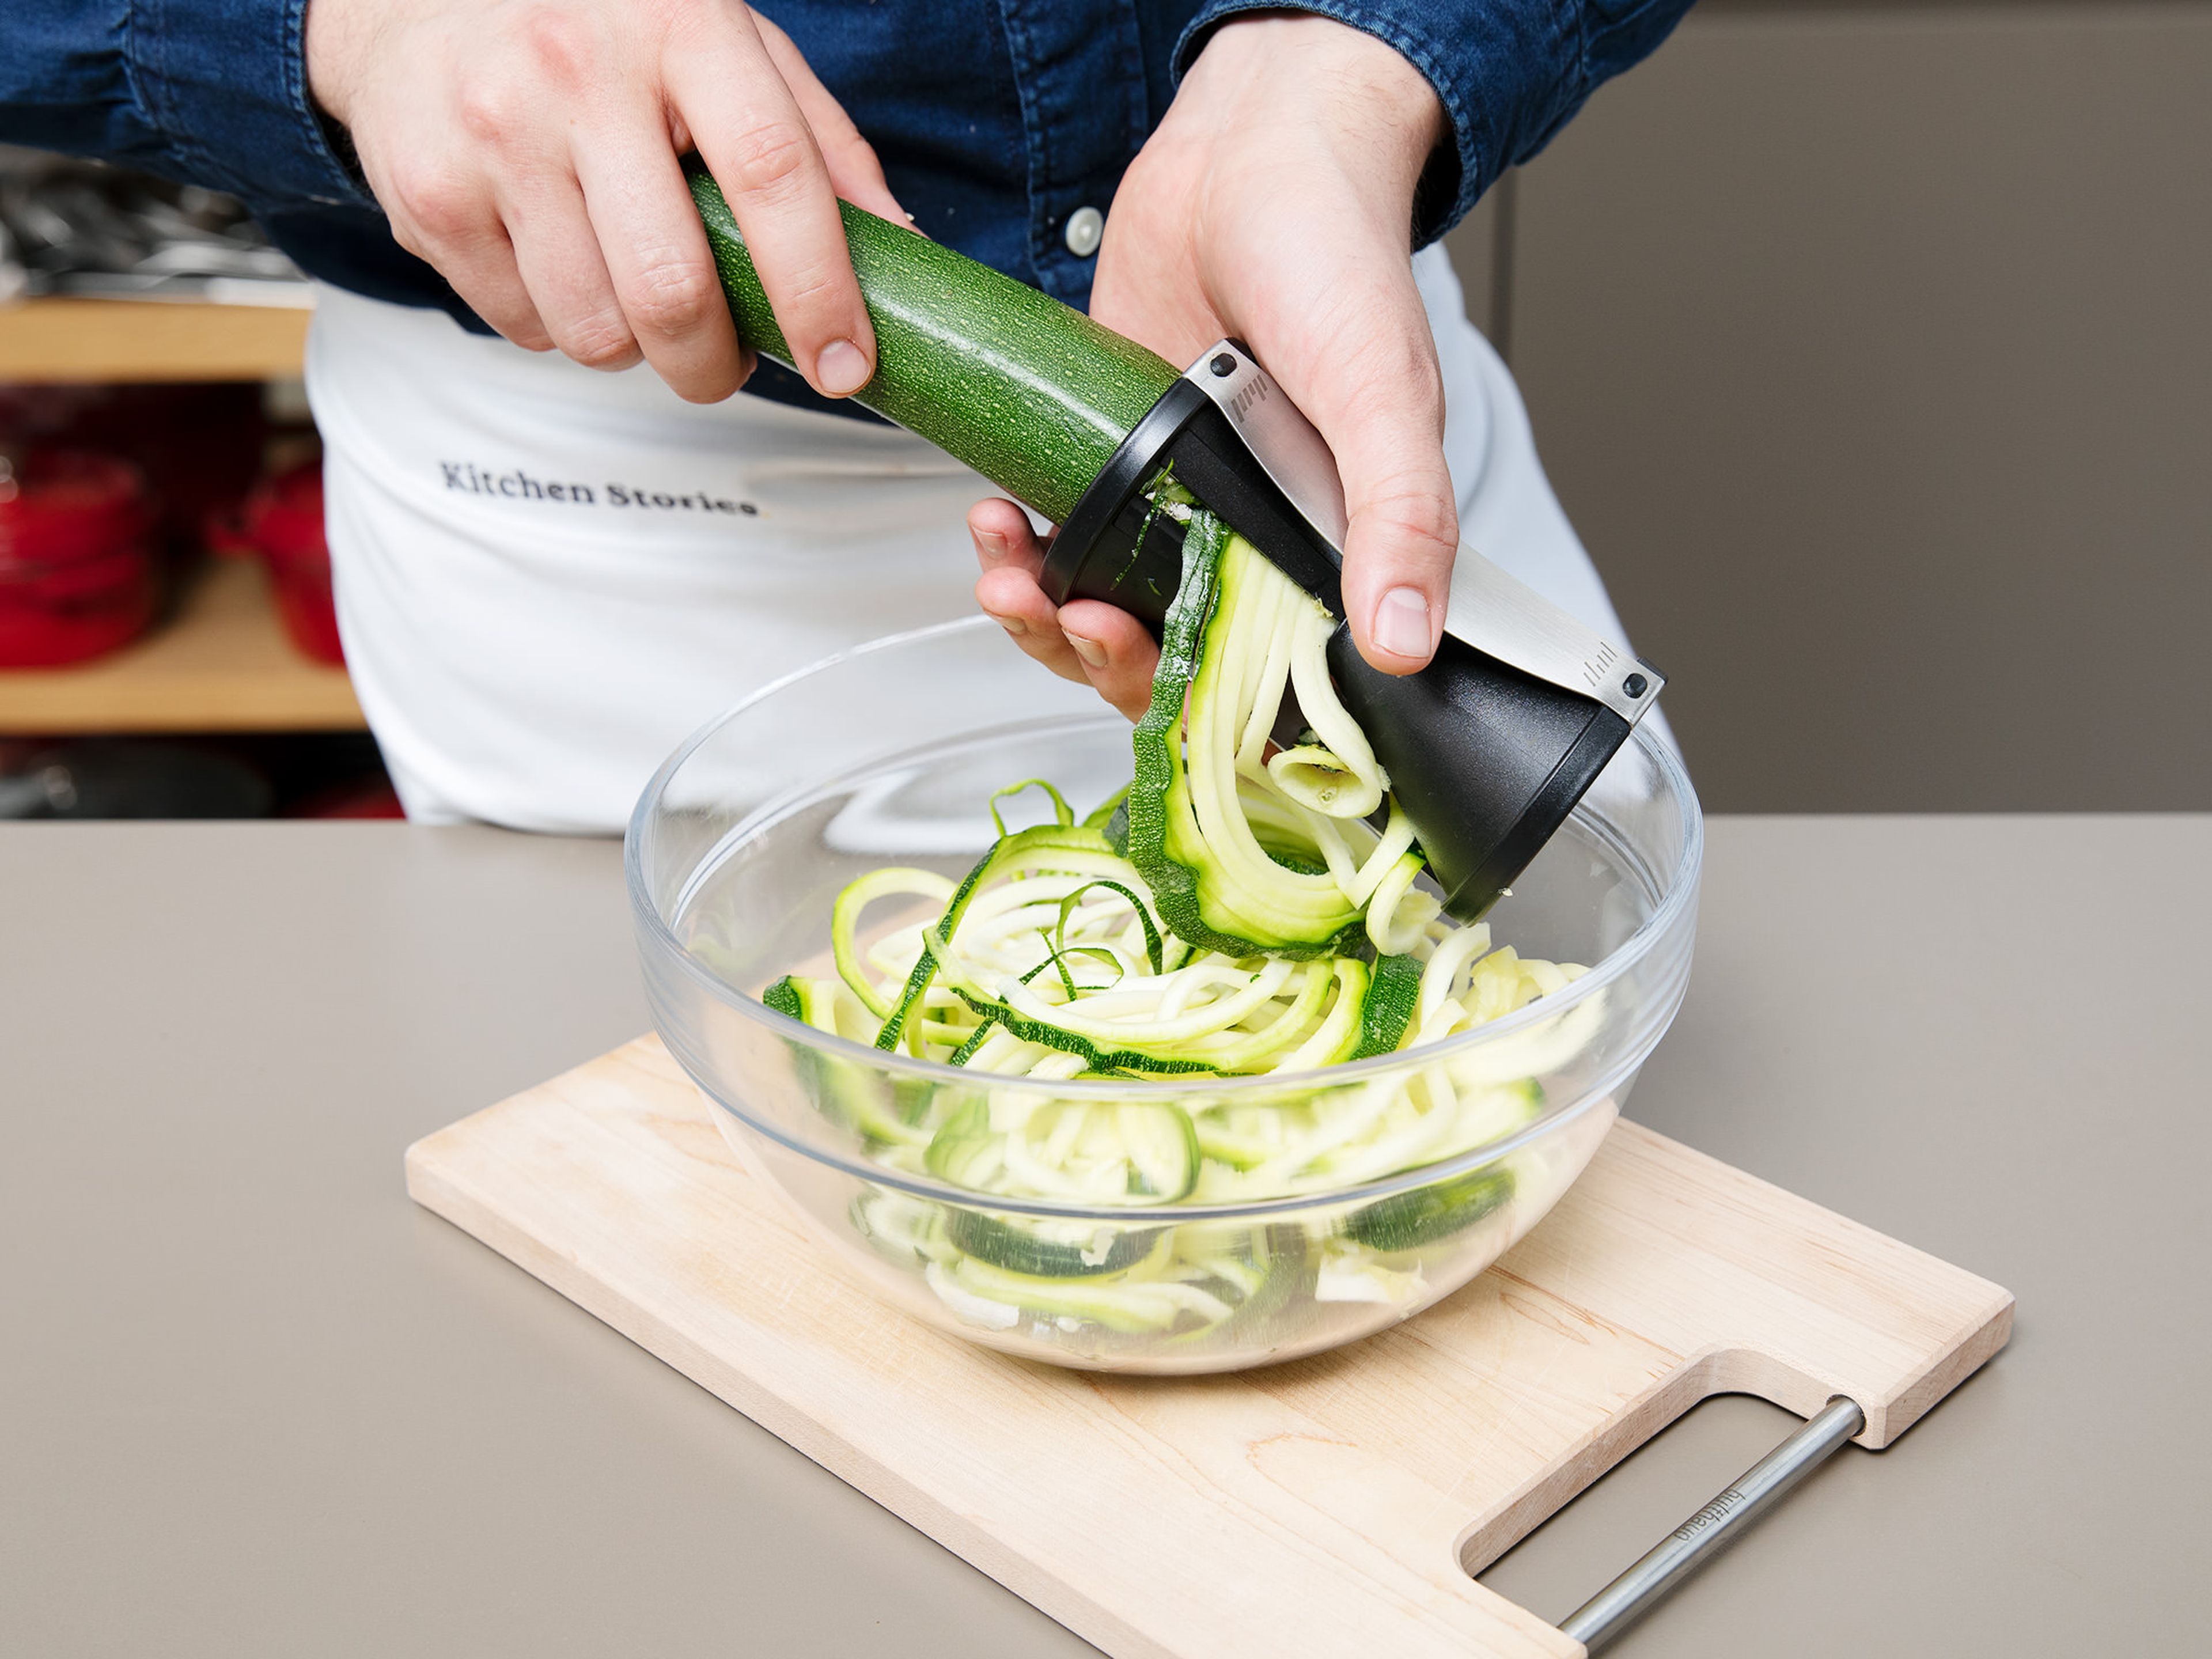 For the zoodles, trim the end off the zucchini and use a spiralizer to create zucchini noodles. Zest lime and juice. Thinly slice chili pepper, peel garlic and ginger, and chop roasted peanuts and cilantro. Heat some toasted sesame oil in a frying pan and fry the zoodles for approx. 10 min, tossing often. Season with salt and pepper, then set aside.